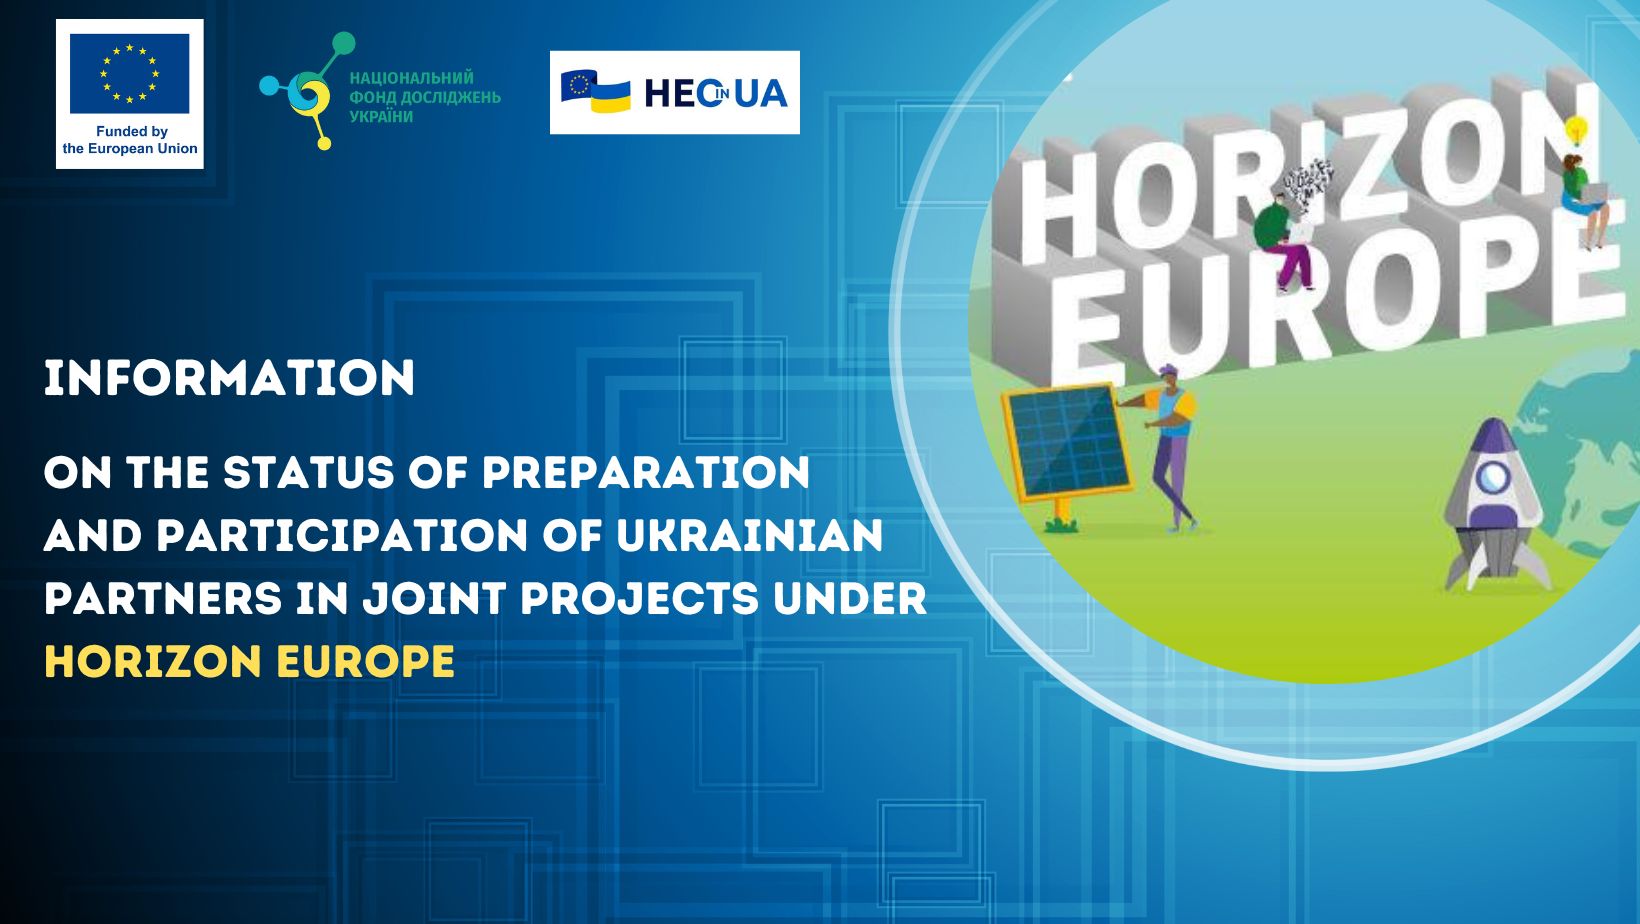 Information on the status of preparation and participation of Ukrainian partners in joint projects under Horizon Europe